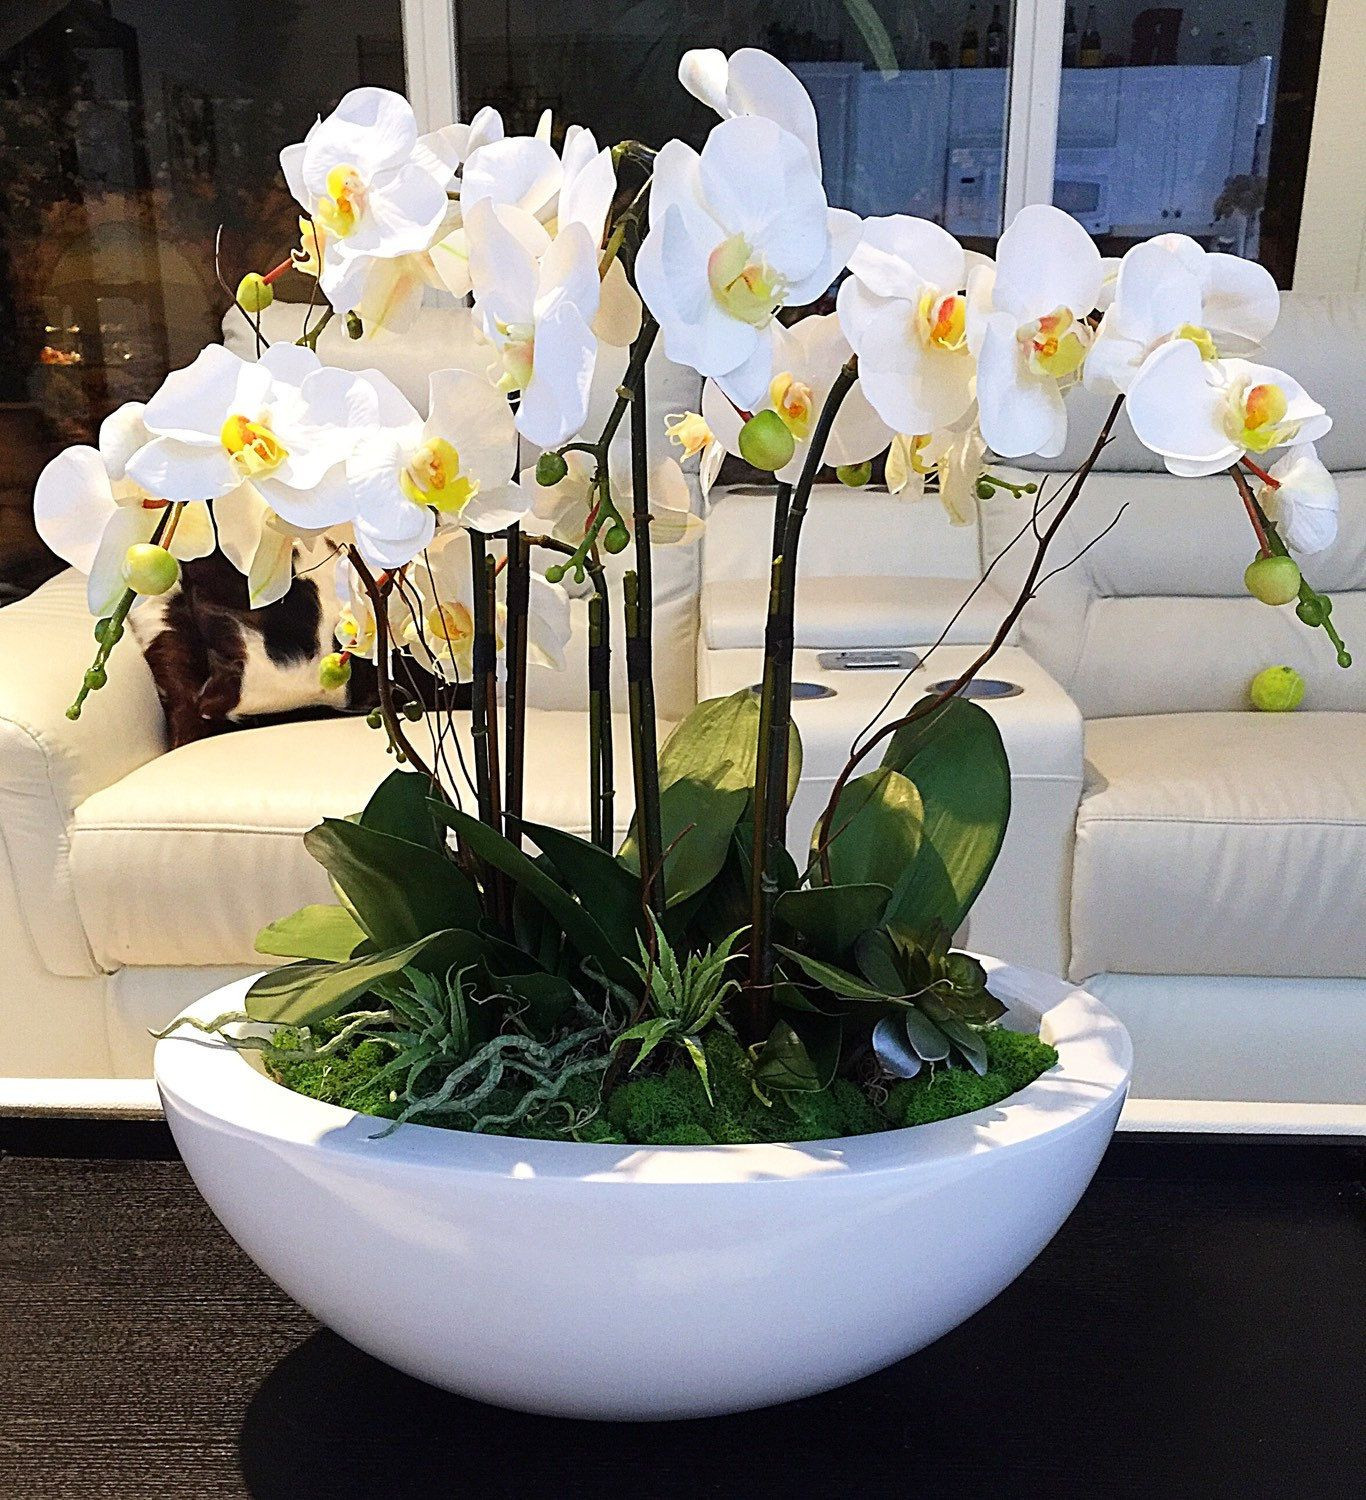 21 Spectacular Extra Large White Vase 2024 free download extra large white vase of large white orchid arrangement realistic orchids set in by flaural intended for large white orchid arrangement realistic orchids set in by flaural